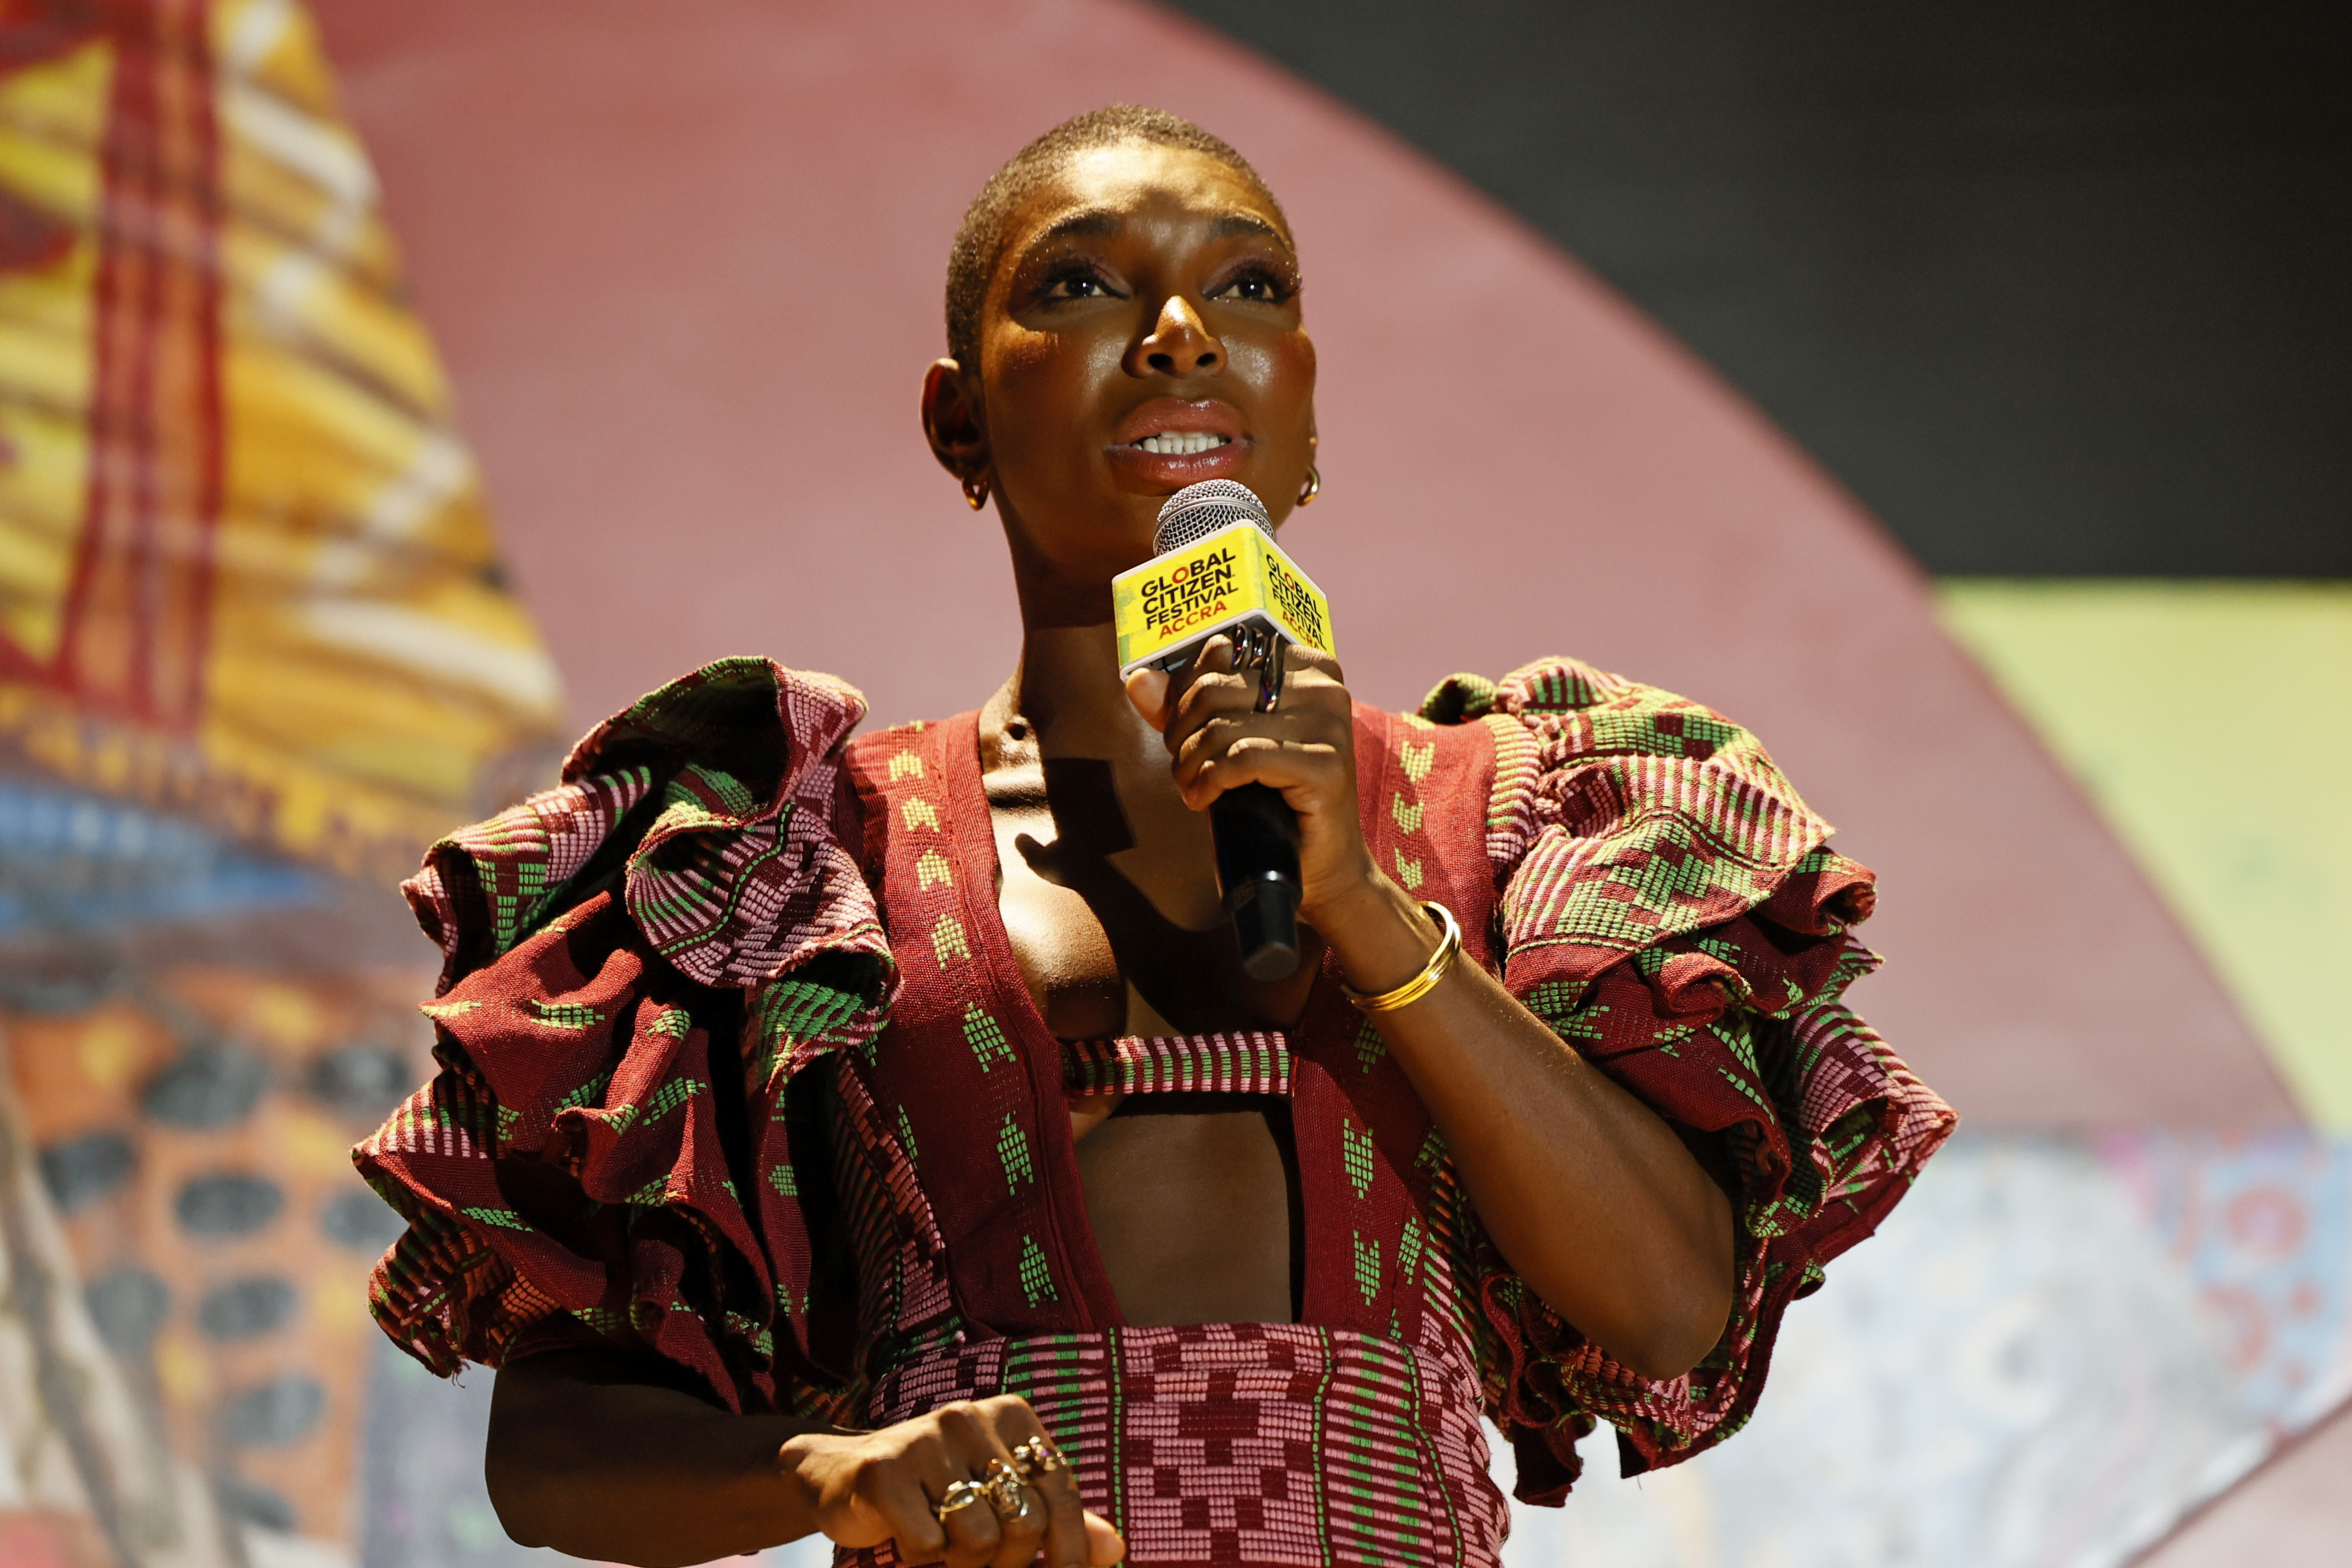 Michaela Coel introduces "For Girls Moment" during Global Citizen Festival 2022: Accra on September 24, 2022, in Accra, Ghana. | Source: Getty Images